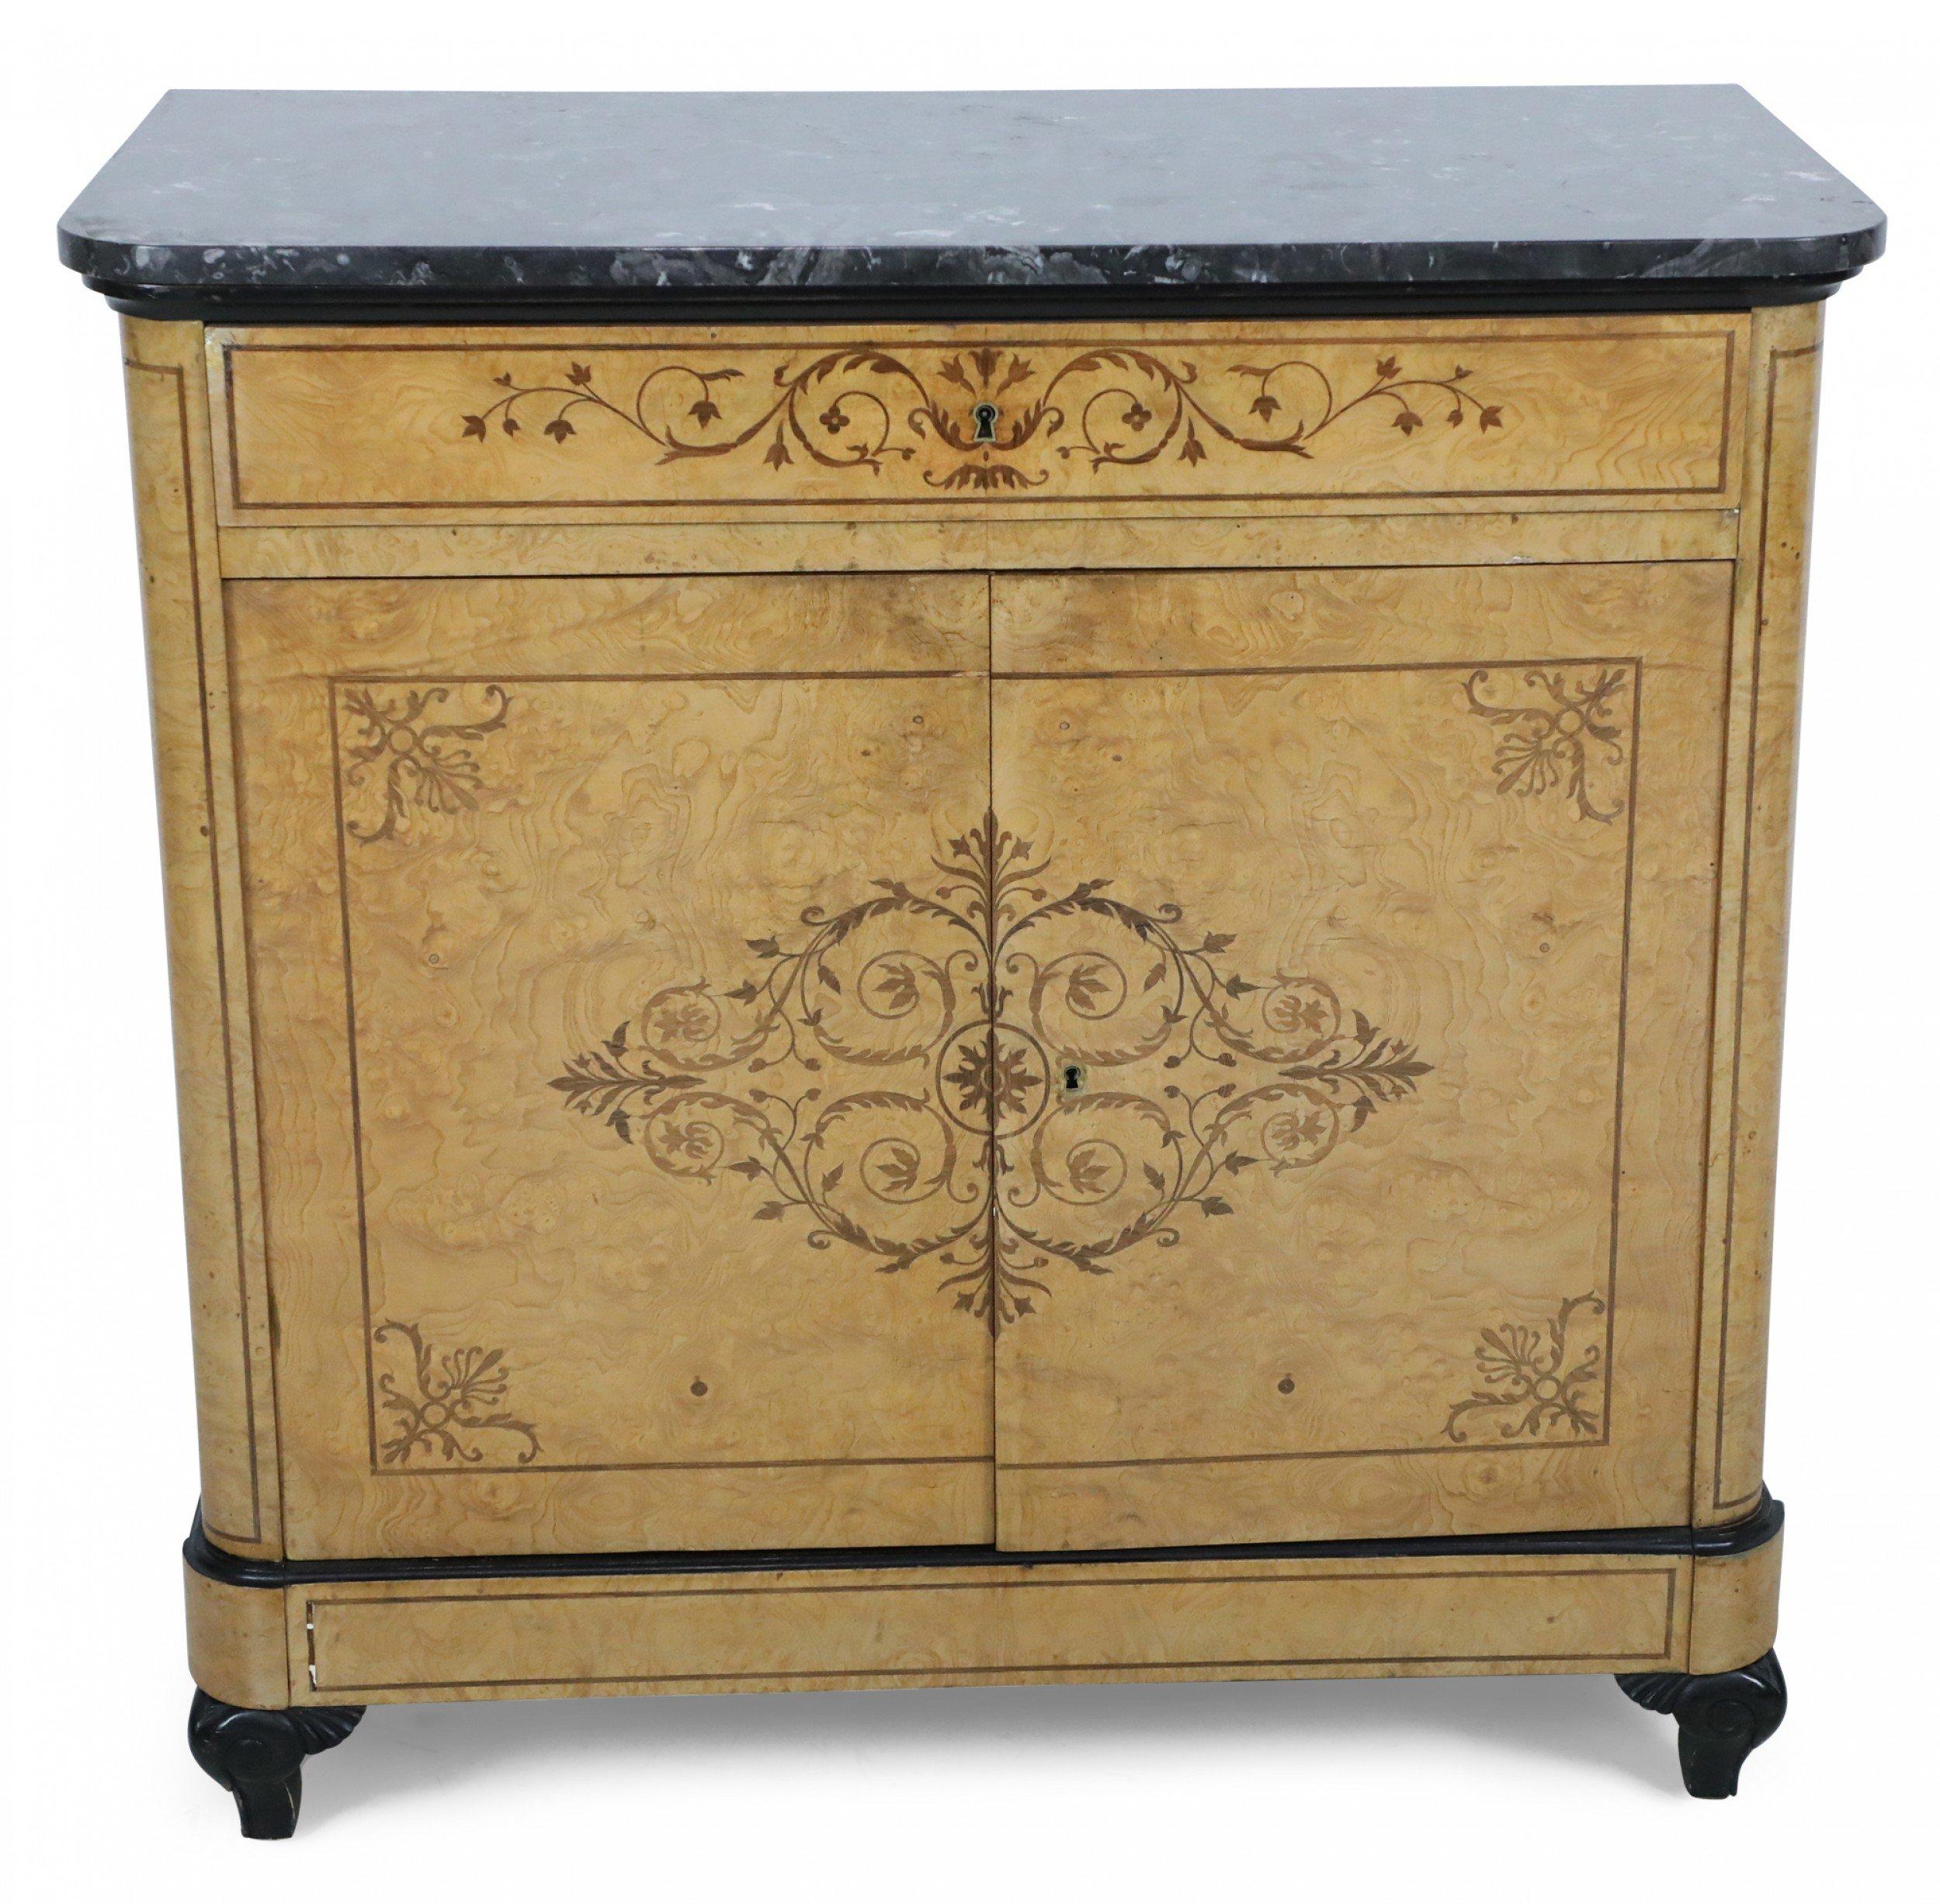 Pair of Charles X two-door commodes with burl maple veneer and inlaid marquetry trim and having bronze keyholes and a single top drawer under a black round edged rectangular marble top. (PRICED AS PAIR).
 